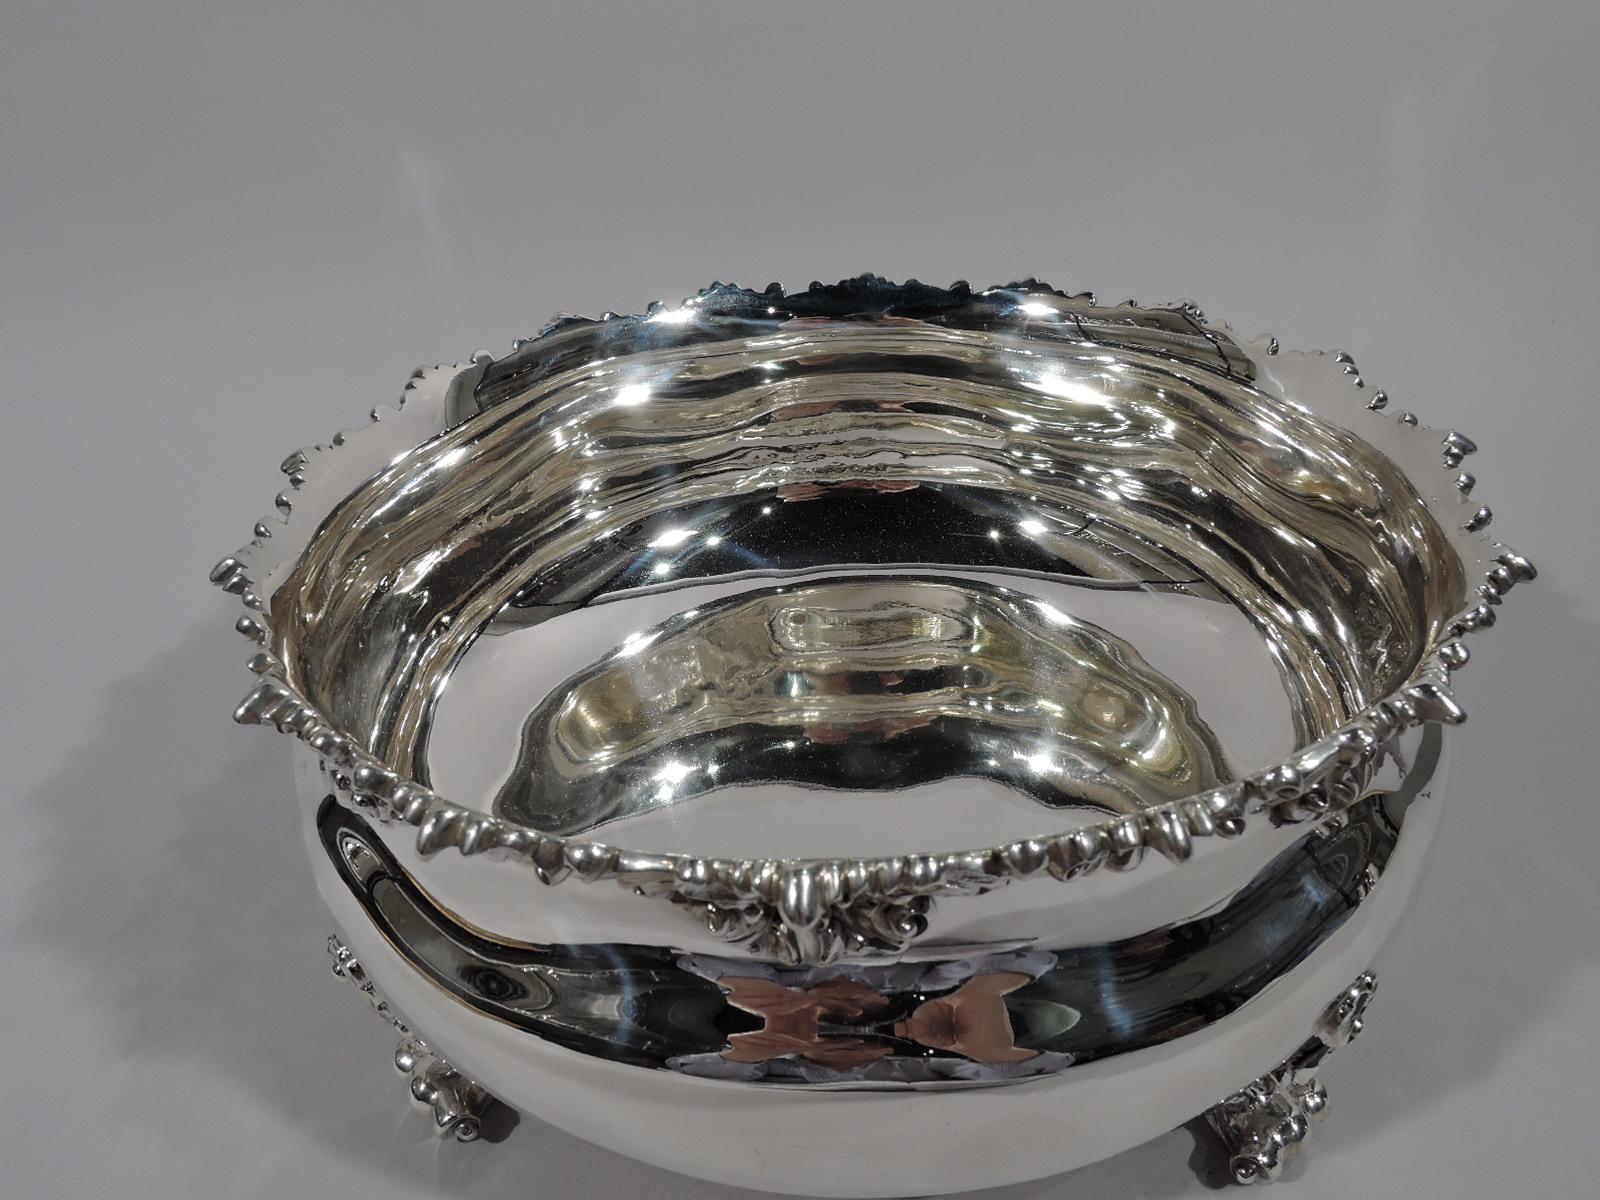 Fancy sterling silver cachepot. Retailed by Bailey, Banks & Biddle in Philadelphia, circa 1890. Bellied with four leafy-scroll volute-scroll supports. Rim applied with same. A pretty centerpiece bowl, perfect for flowers. Fully marked including